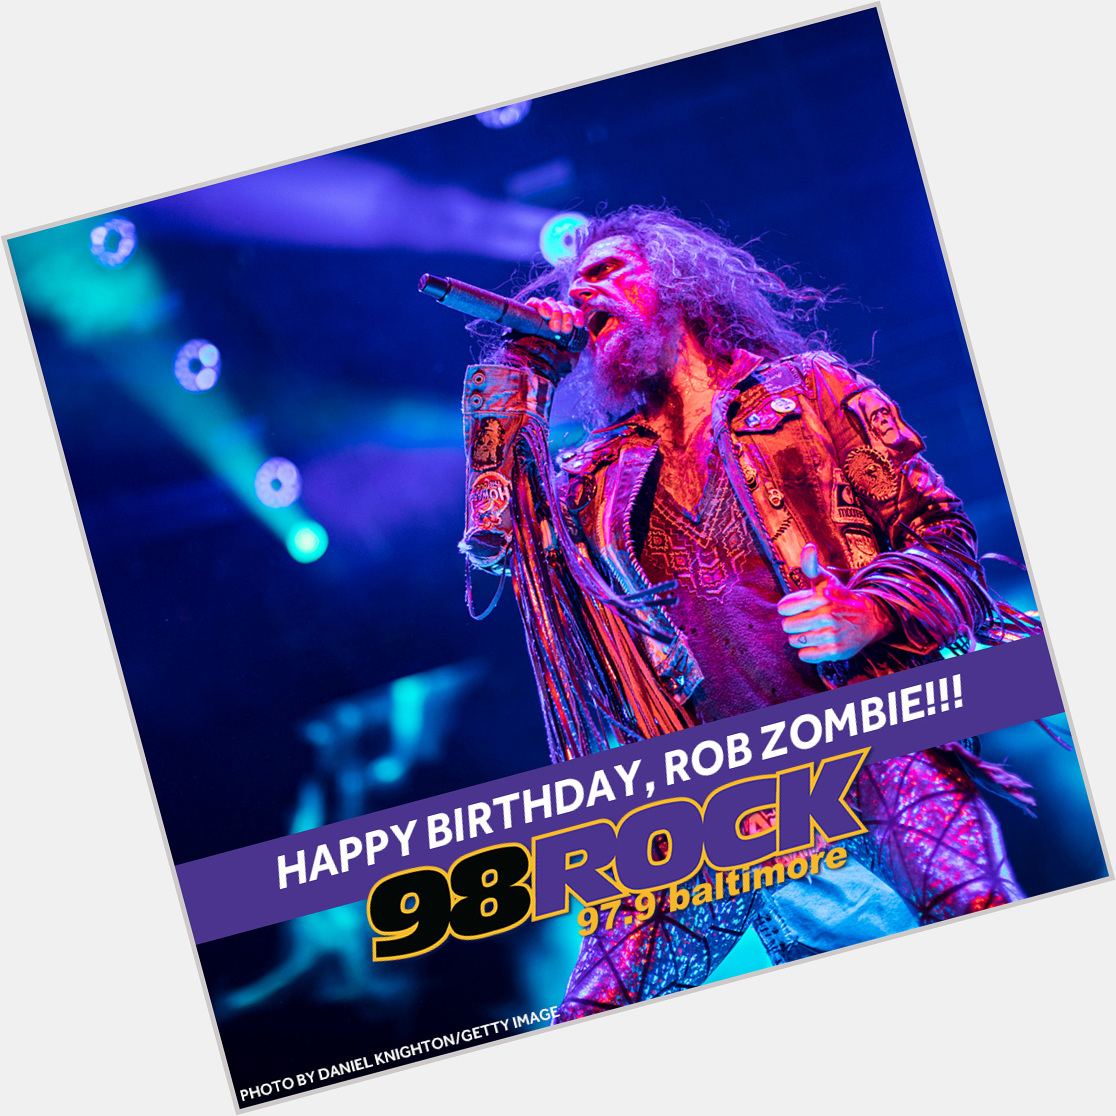 Dig through the ditches and burn through the birthday candles. Happy Birthday, Rob Zombie. 